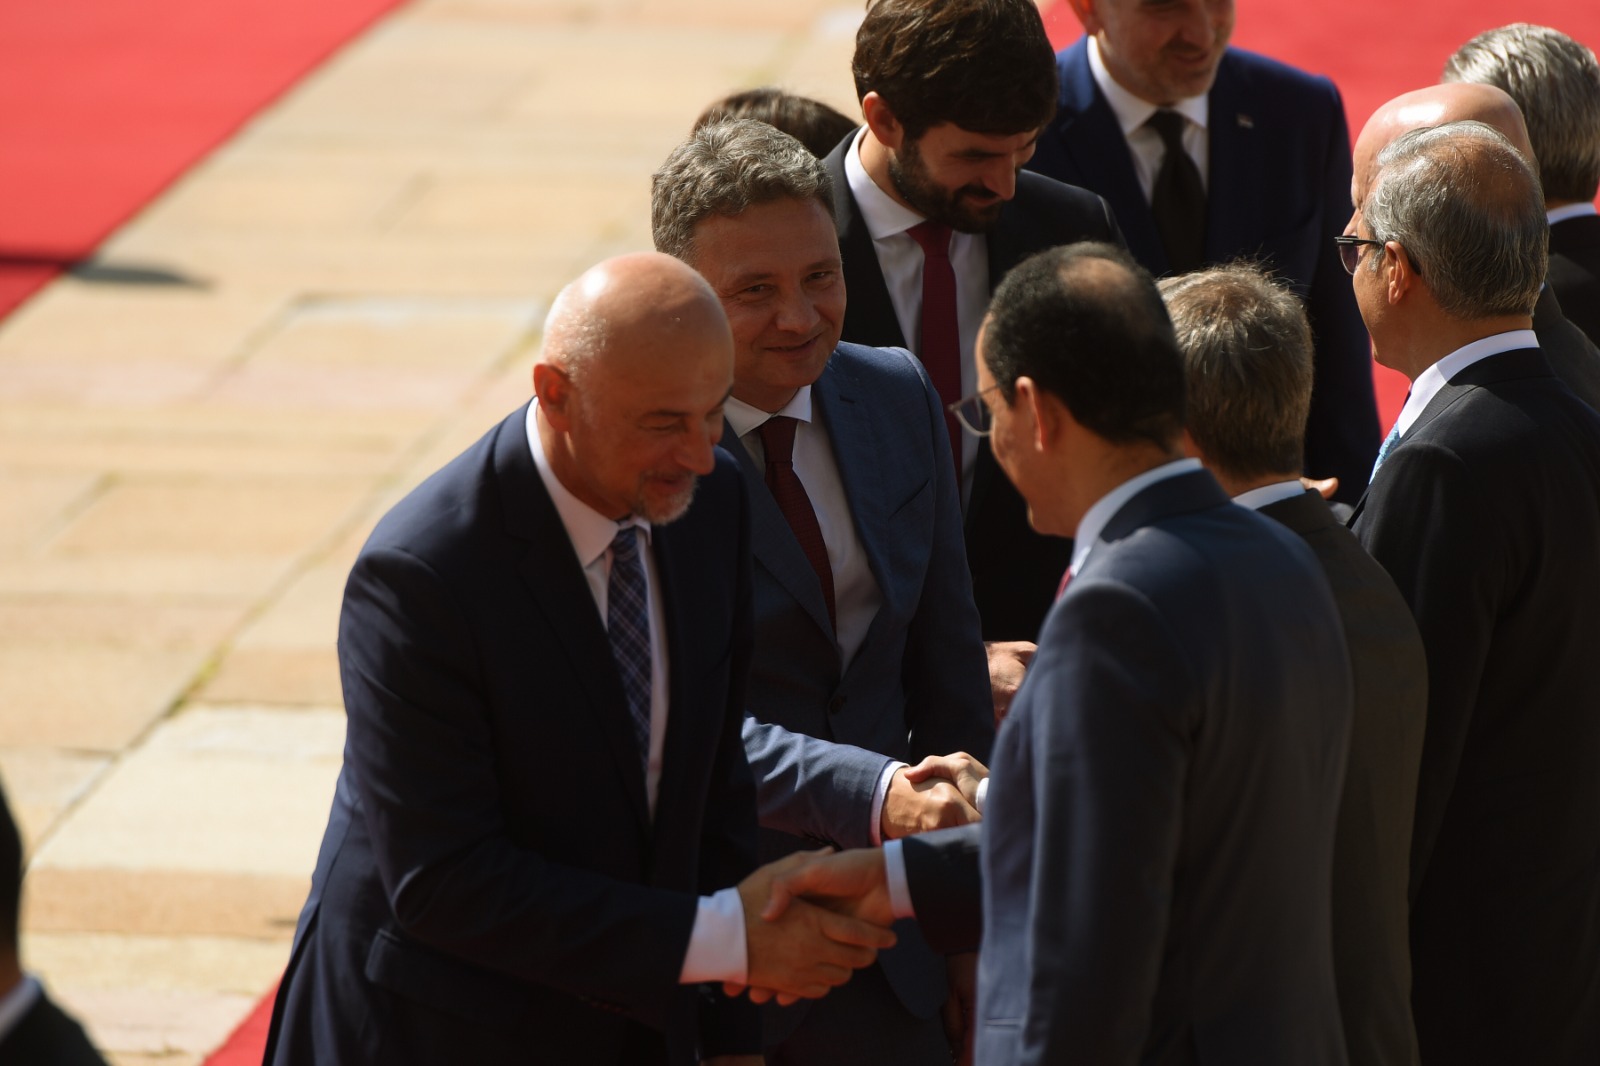 During the visit of the President of the Republic of Turkey, a Memorandum of Cooperation in the field of eGovernment was signed